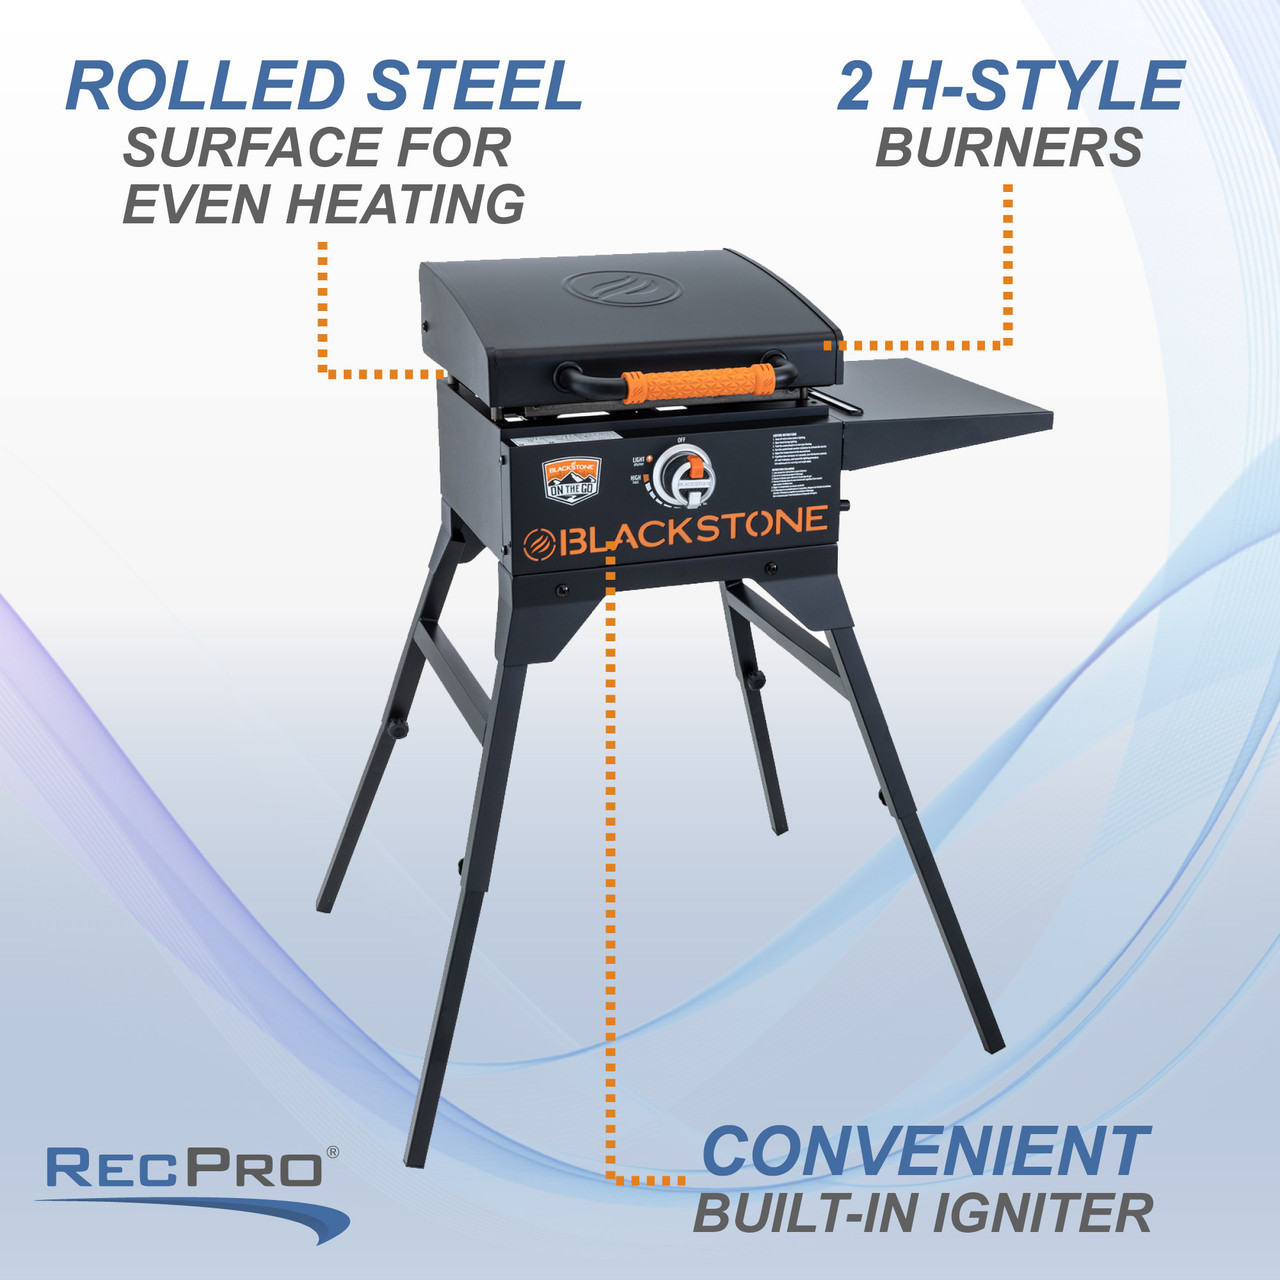 RV Griddle Combo Outdoor Propane Flat Top Grill - RecPro